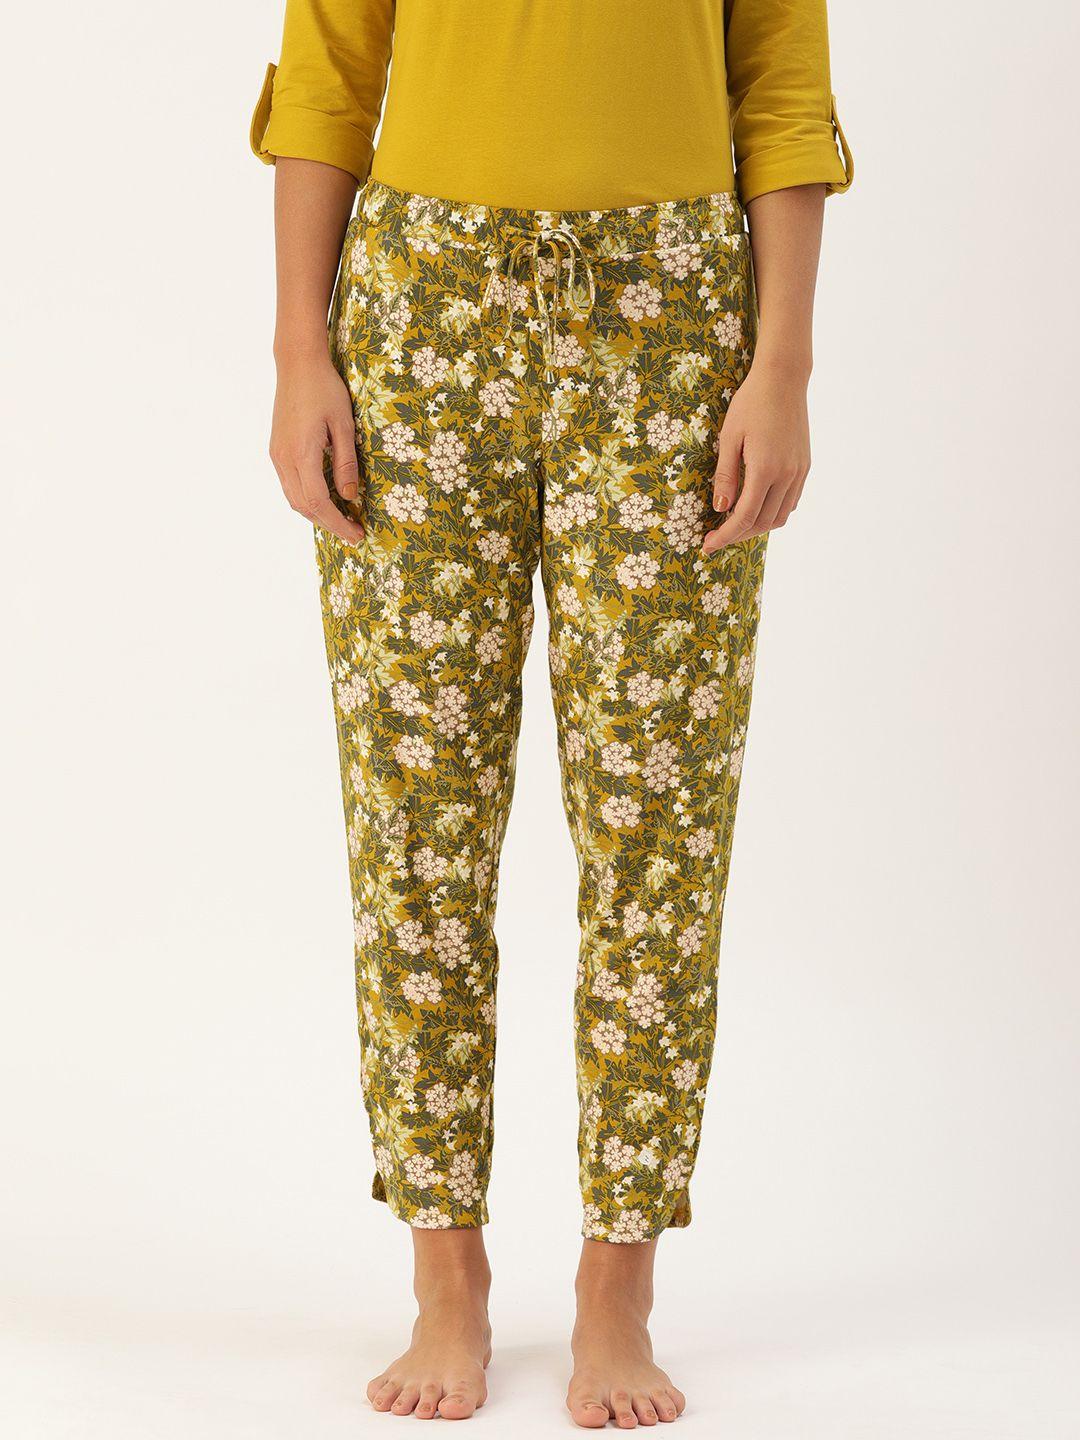 enamor women  mustard yellow charcoal grey floral print relaxed fit shop in pyjama lounge pants